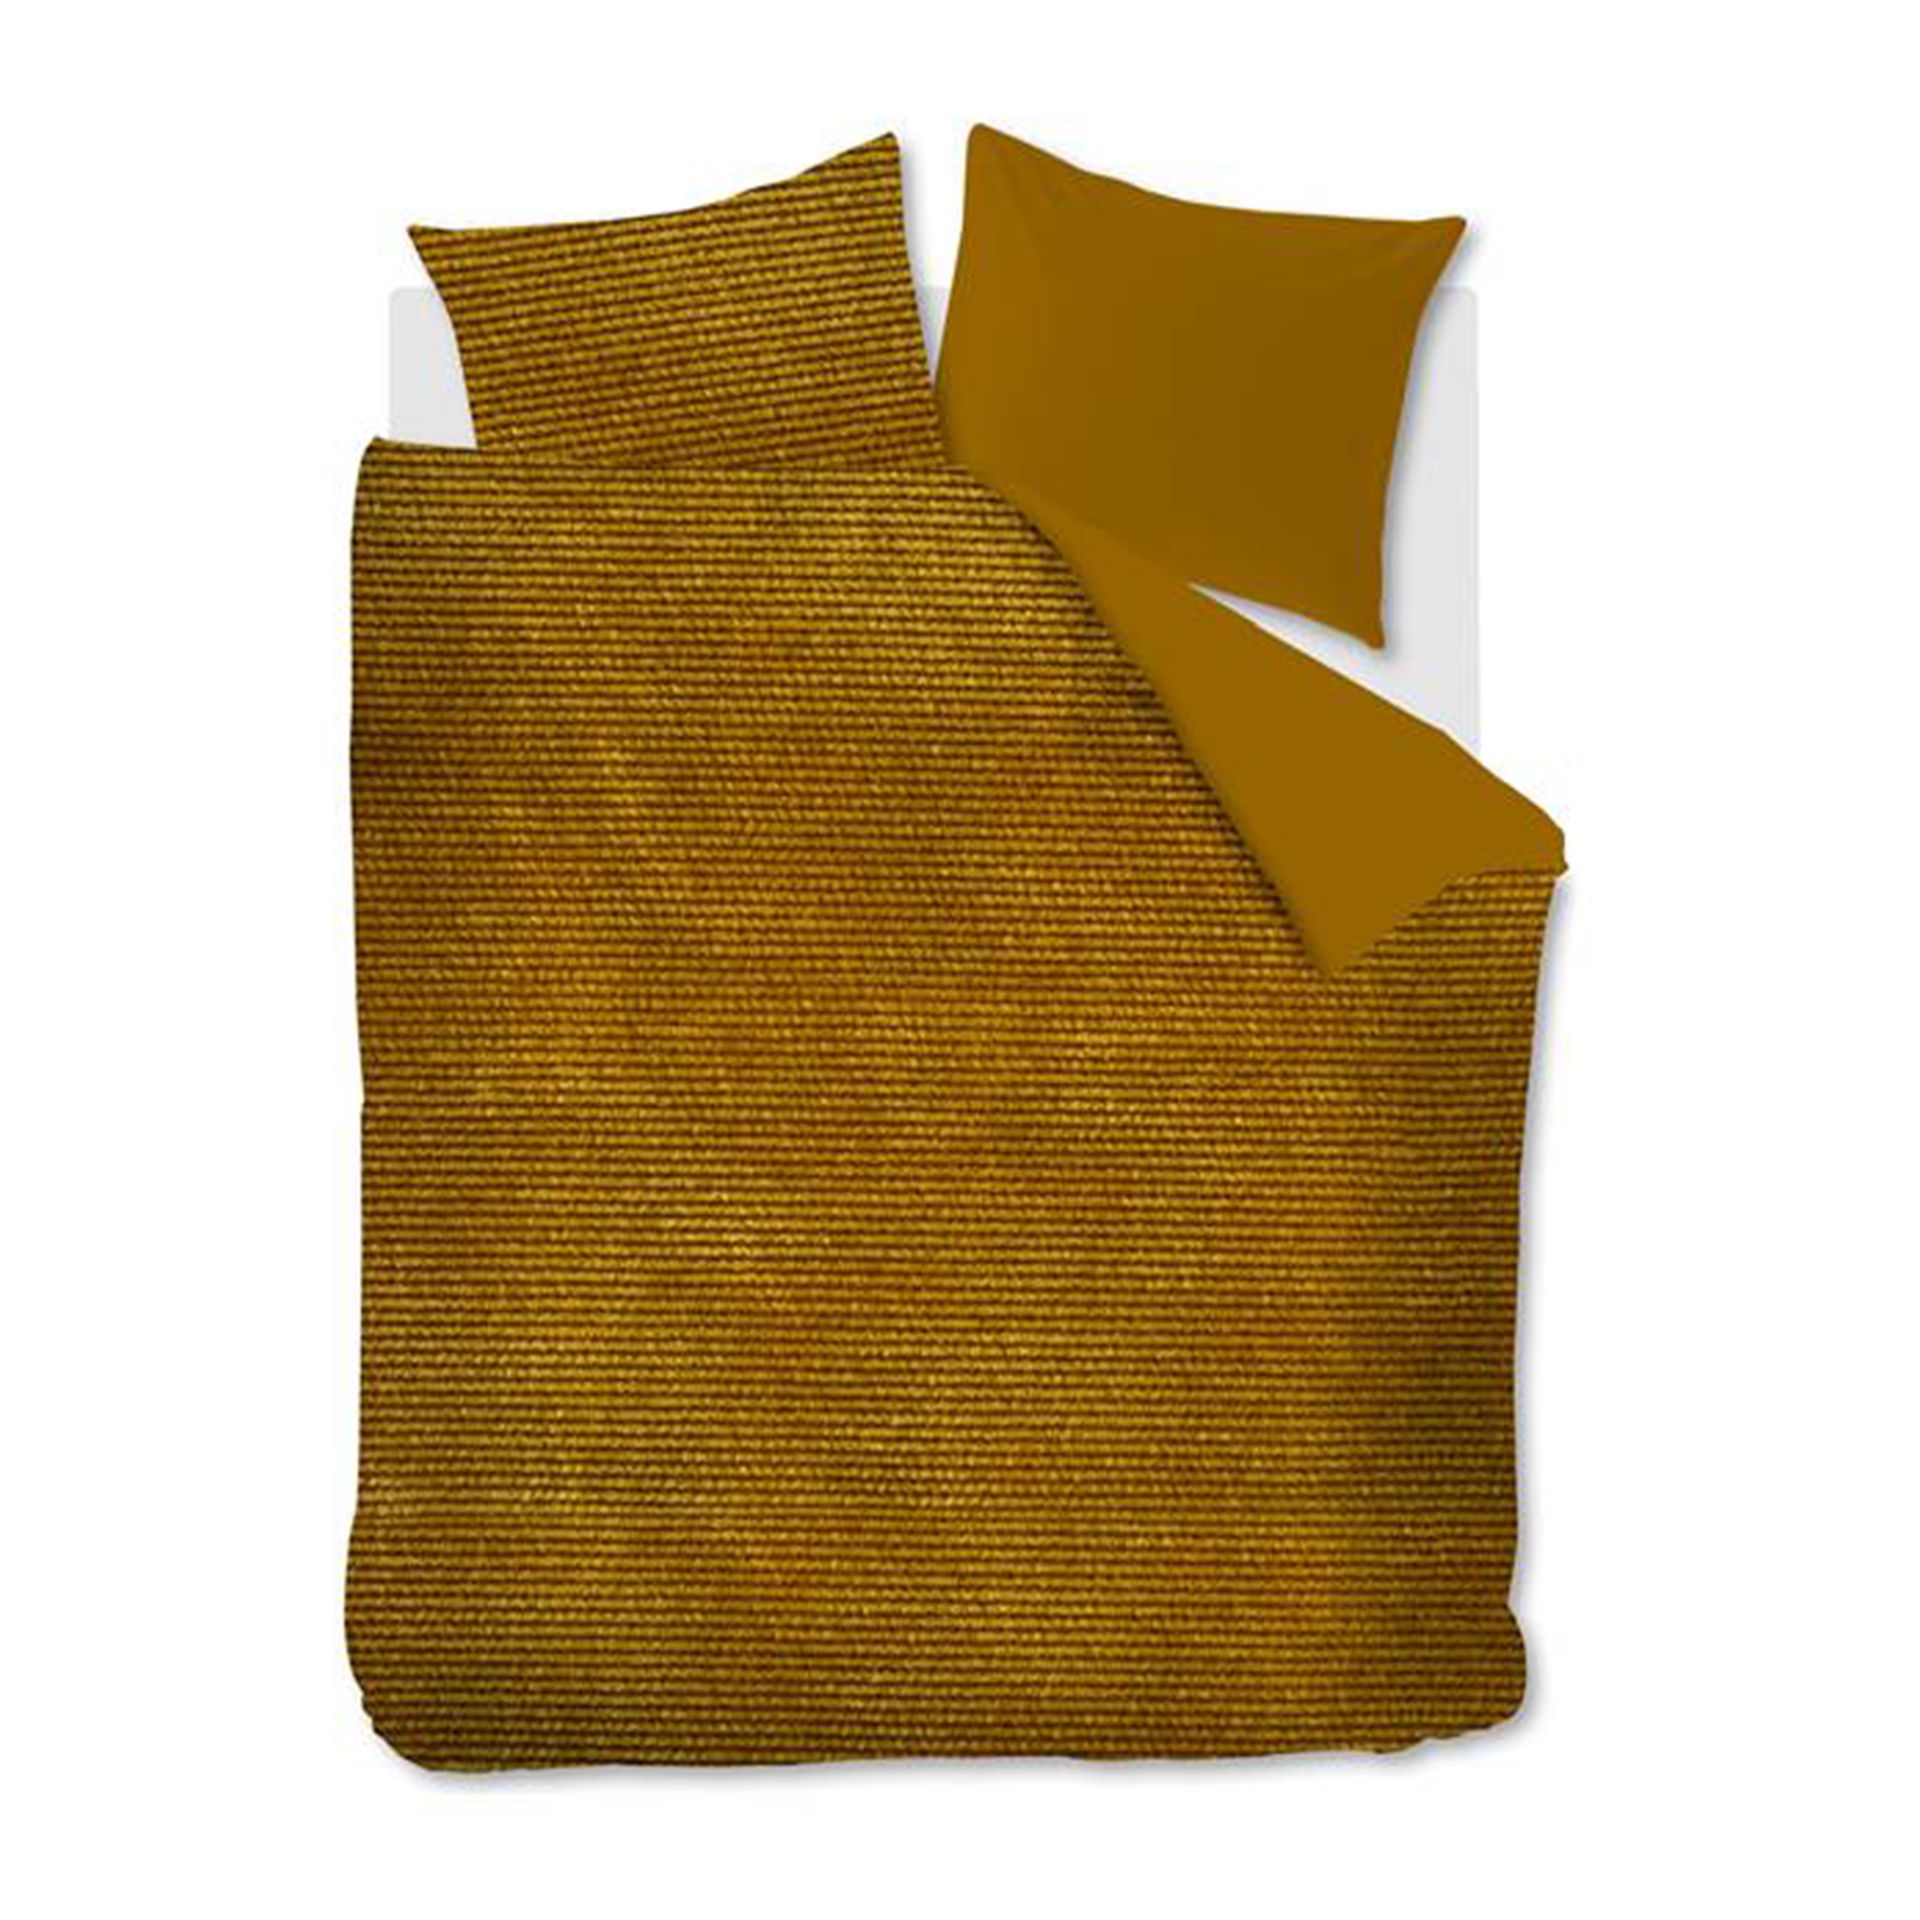 At Home by BeddingHouse - Cosy Corduroy Ochre dekb